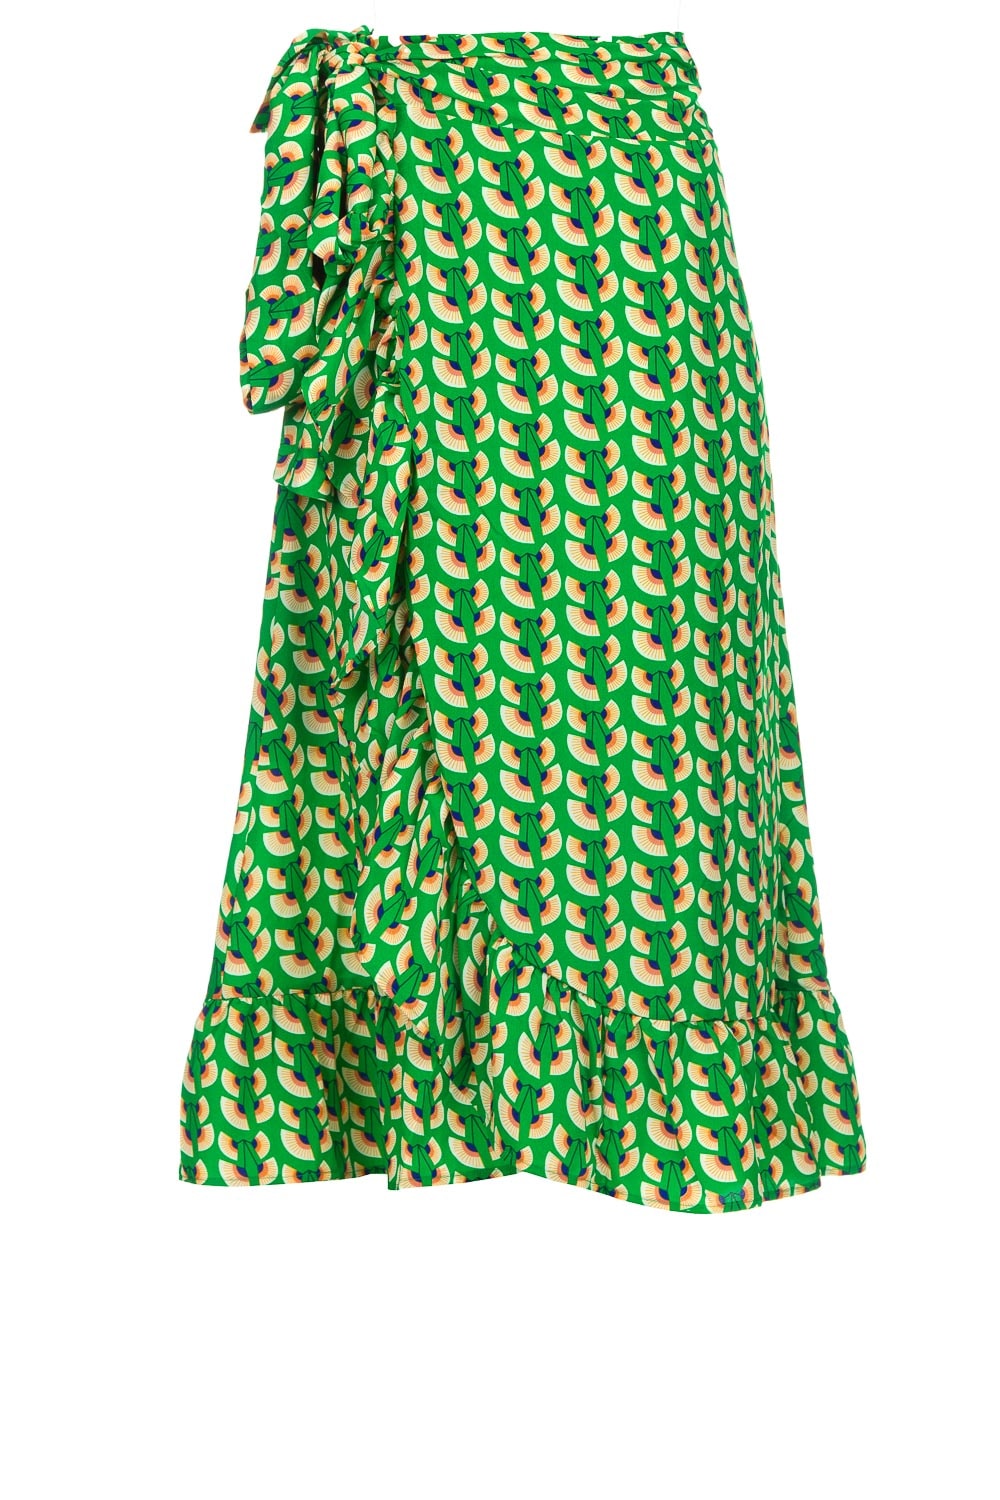 Super Printed maxi skirt Amby | green... | Lolly's Laundry | Little Soho WY-94